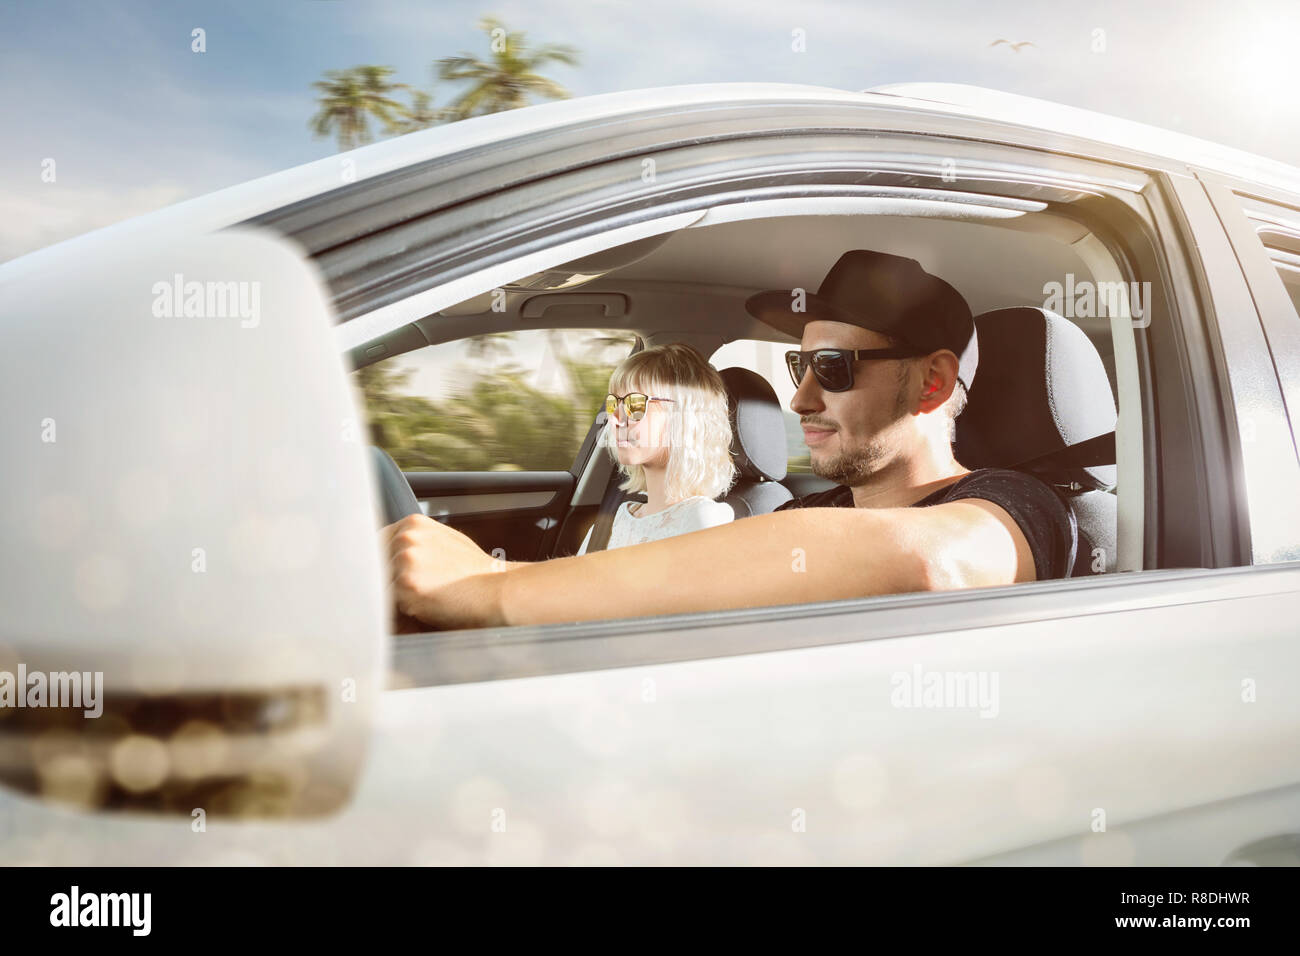 Young couple on summer vacation driving a car in a tropical location Stock Photo